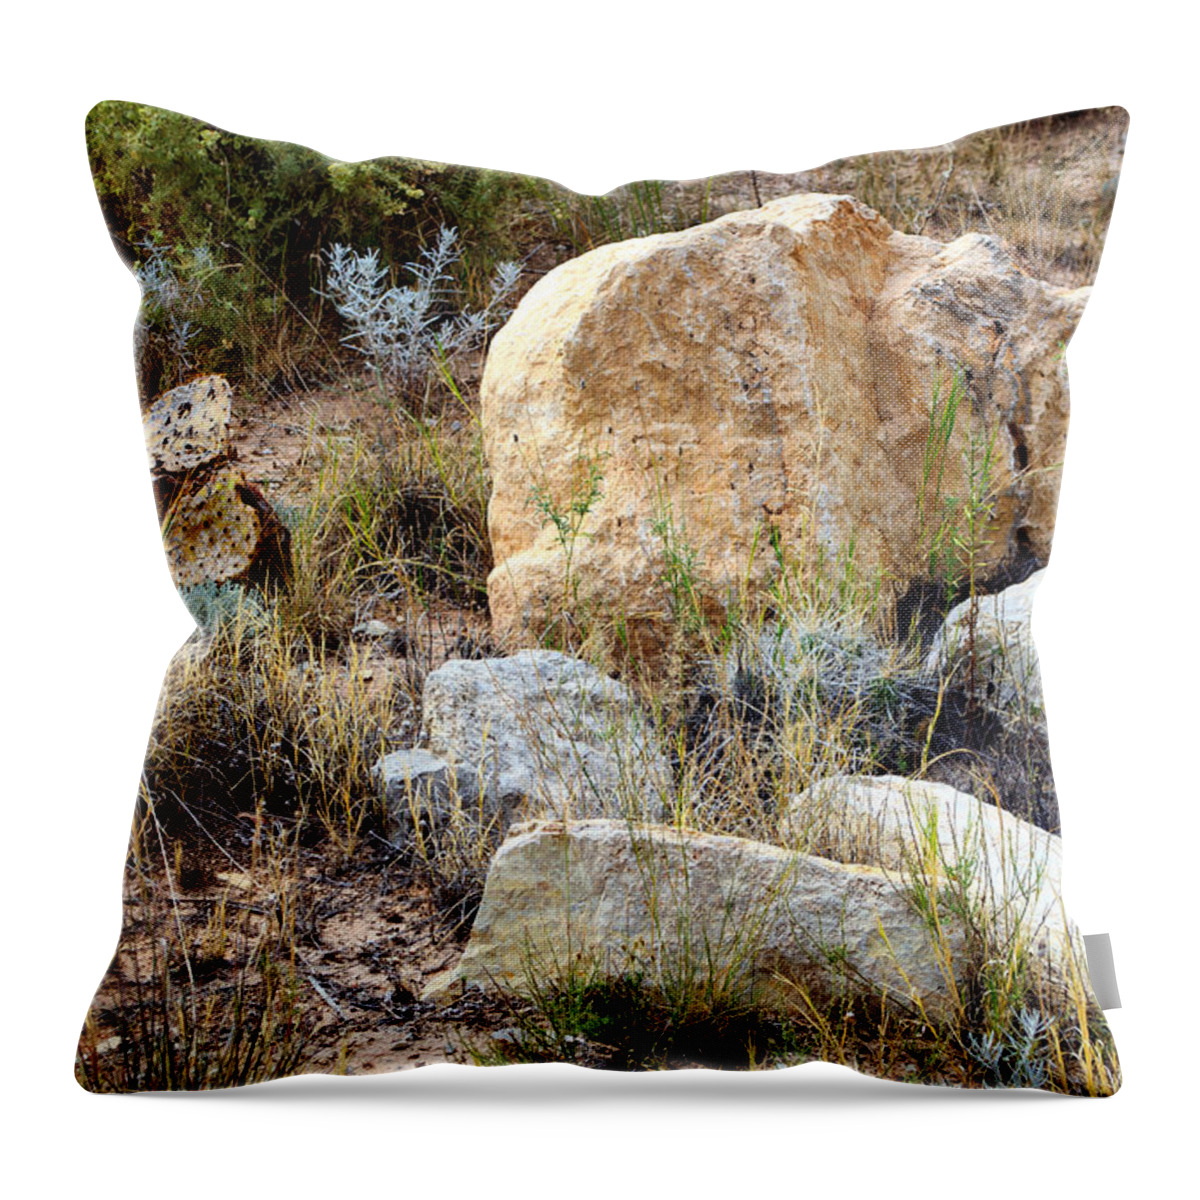 Sunrise Throw Pillow featuring the photograph Rock and Cacti Garden by Tikvah's Hope